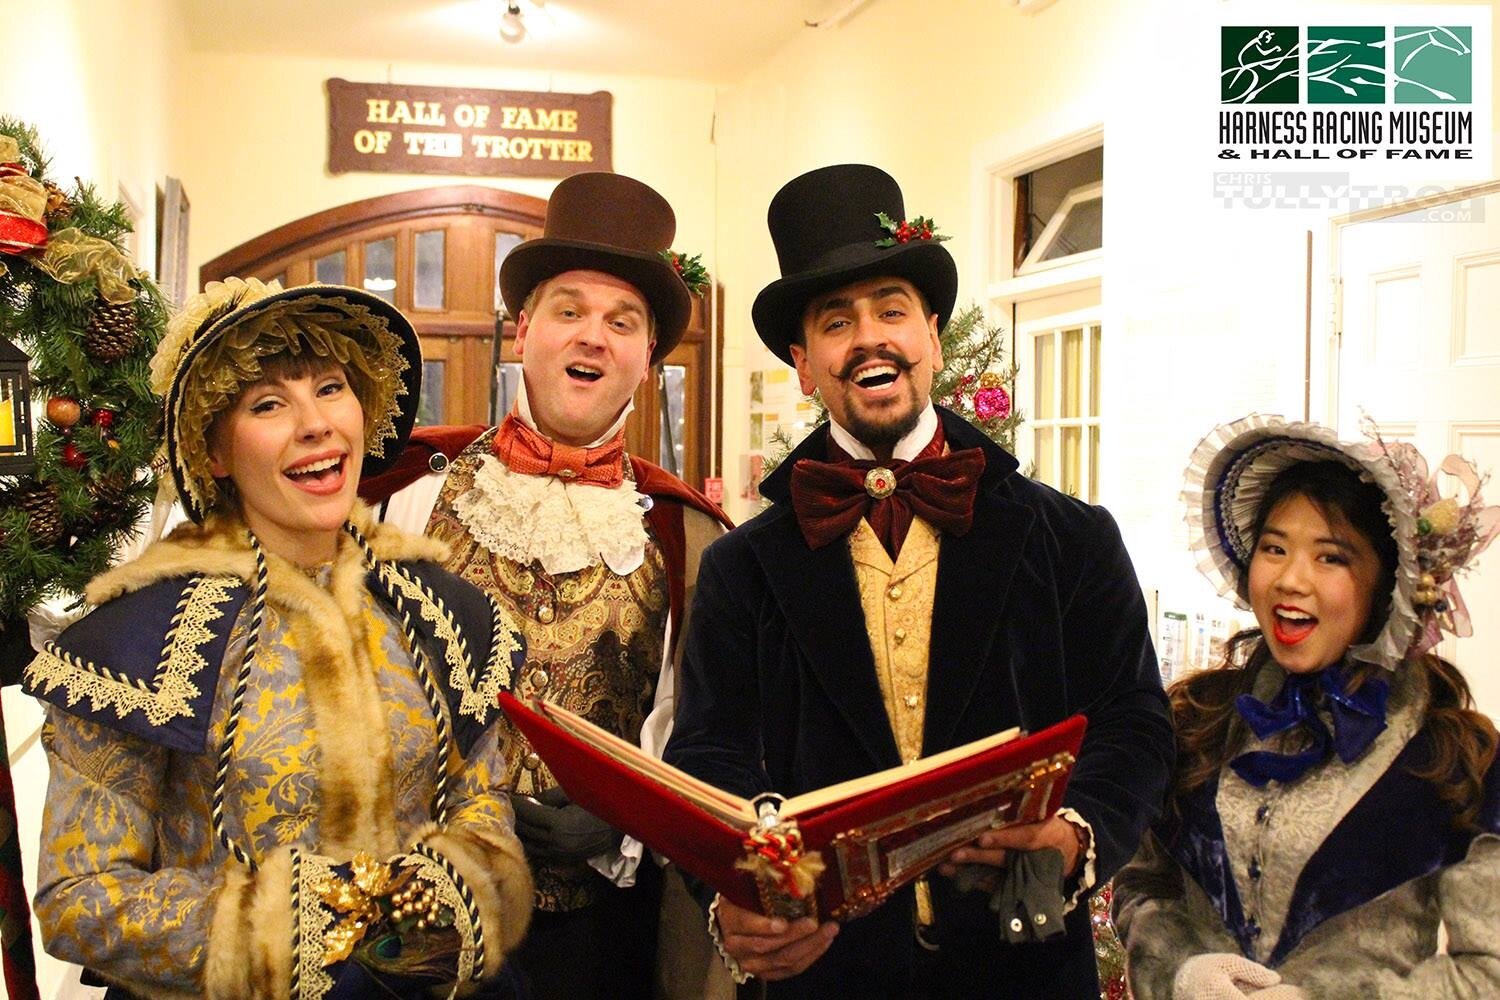 The Yuletide Carolers will perform at the Harness Racing Museum and Hall of Fame on Thursday, December 7.